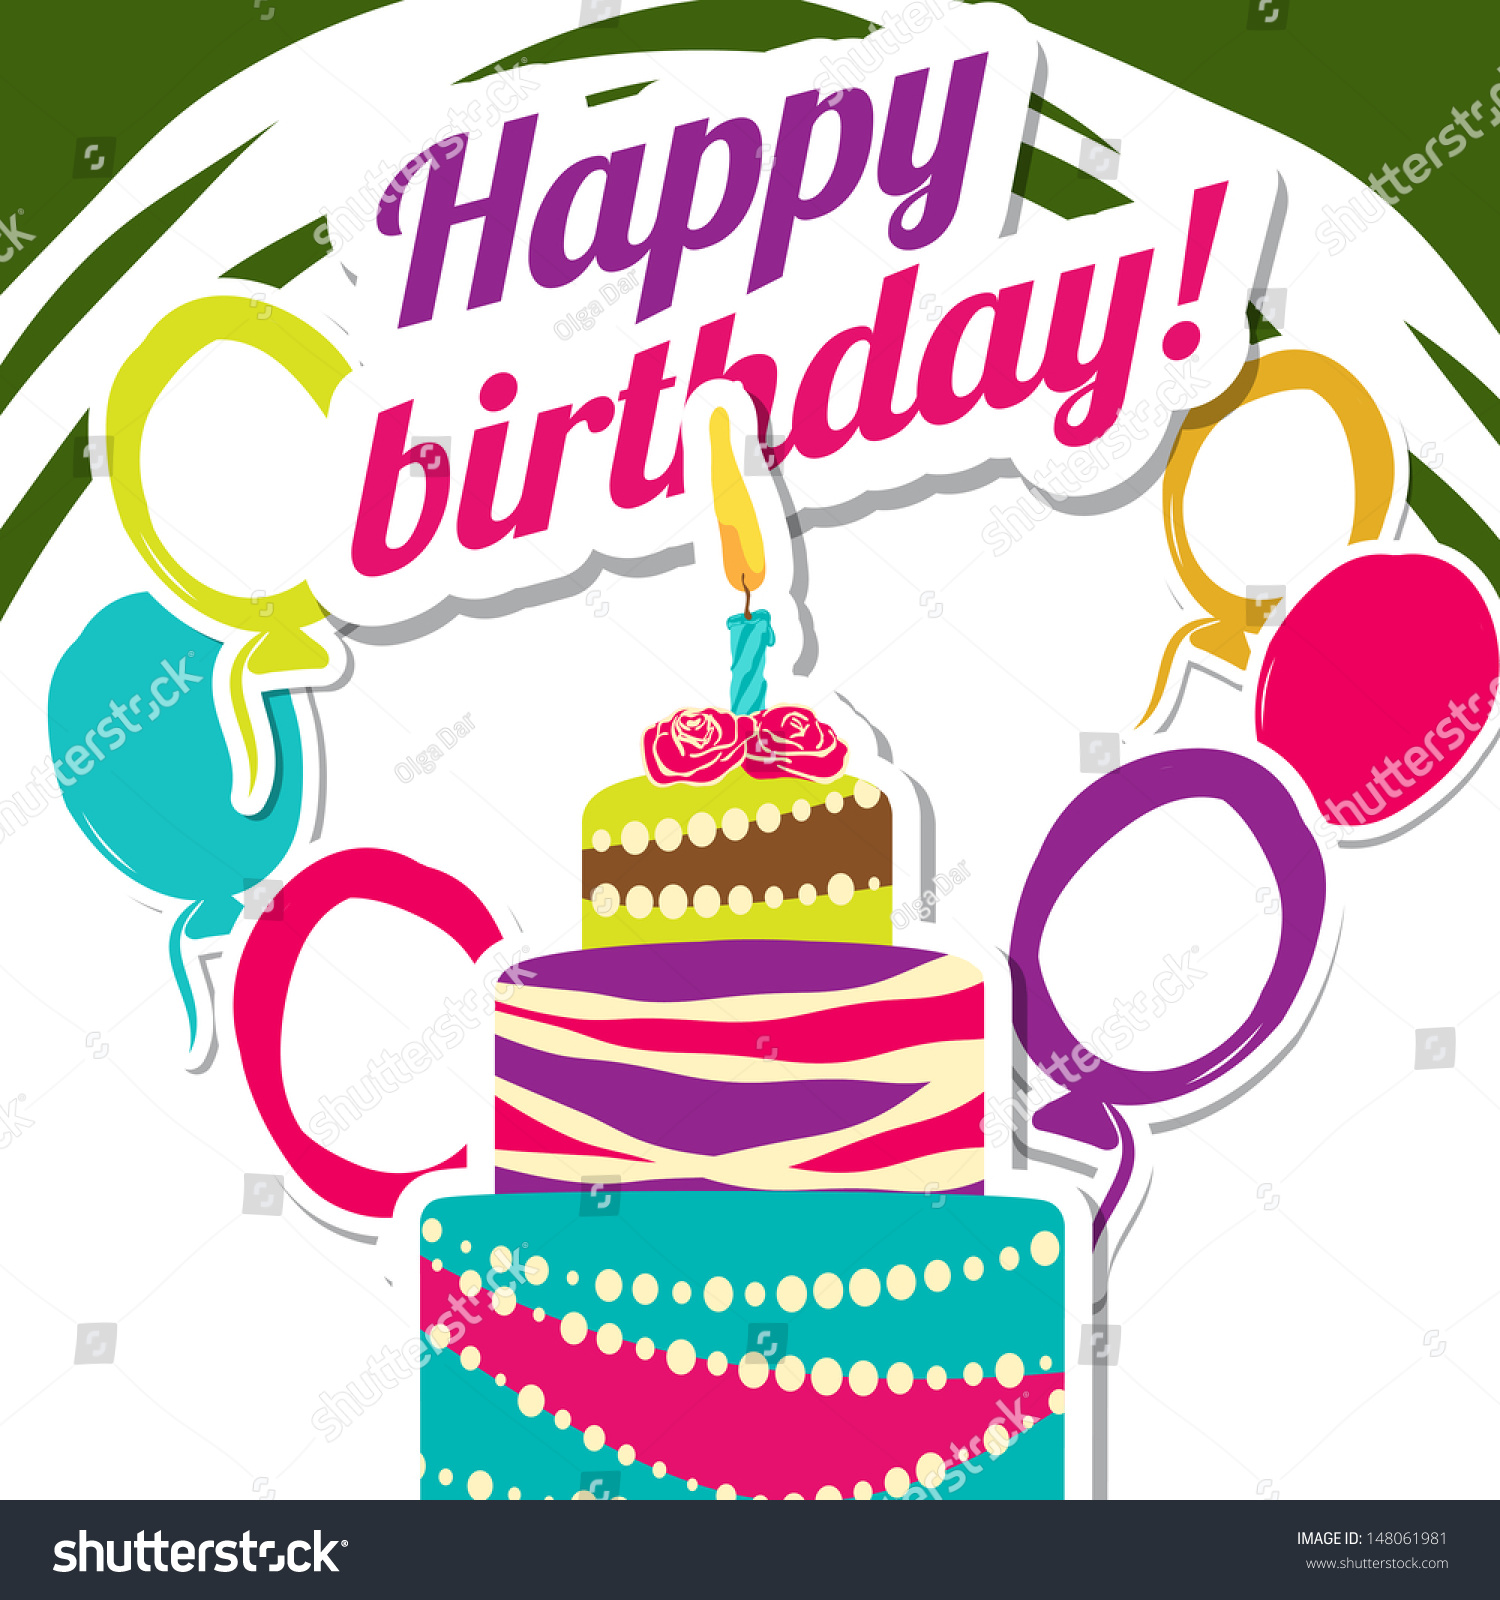 Vector Picture With Birthday Cake - 148061981 : Shutterstock